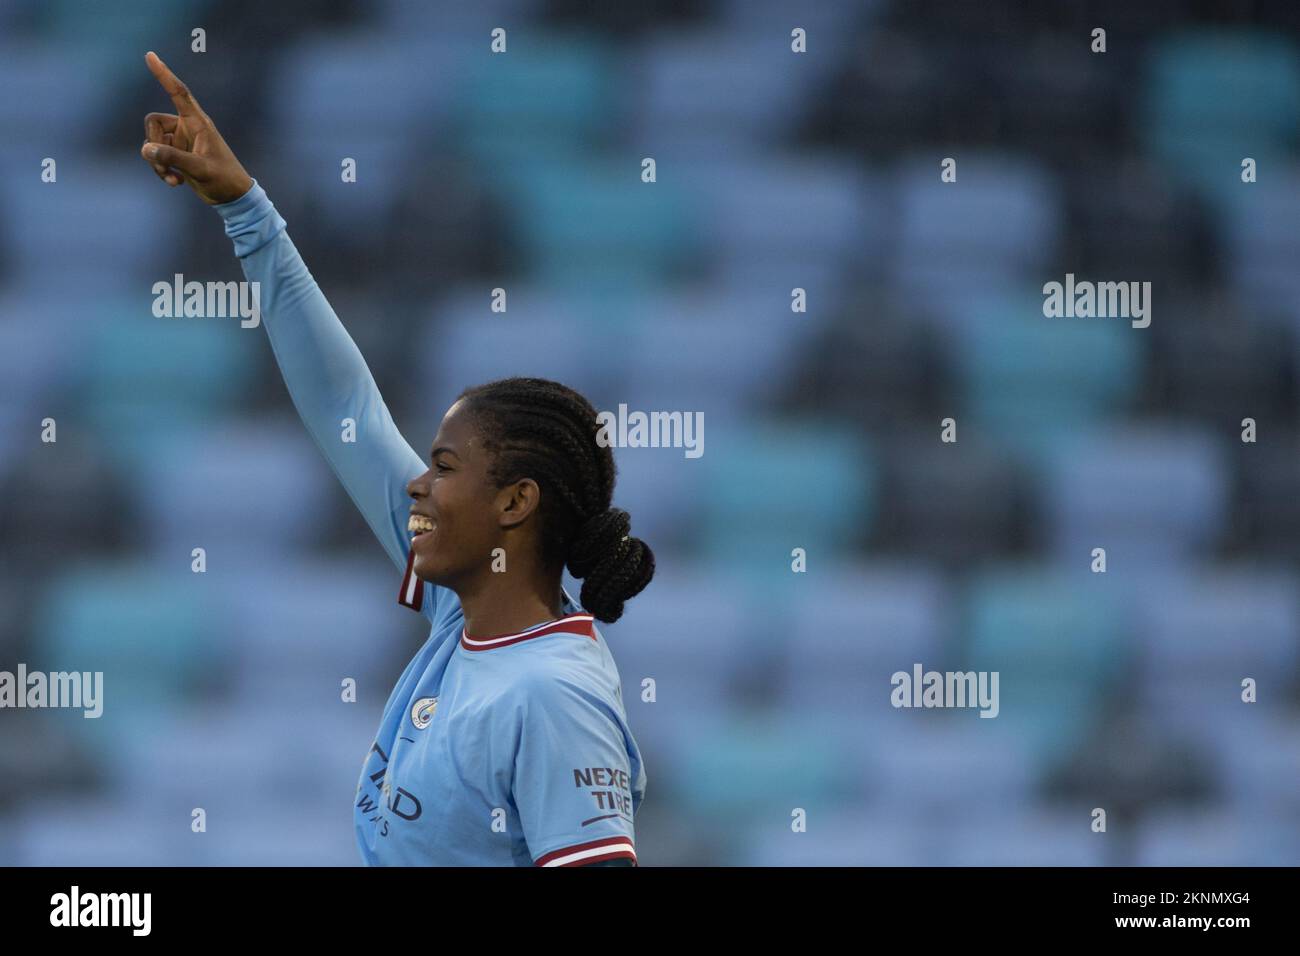 Manchester, UK. 27th Nov, 2022. Manchester City Academy Stadium, Manchester, Greater Manchester, 27th November 2022 The FA WomenÕs Continental Tyres League Cup Manchester City v Sunderland Khadija Shaw of Manchester City Women celebrates scoring a goal to make it 3-0 against Sunderland AFC Women. Credit: Touchlinepics/Alamy Live News Stock Photo